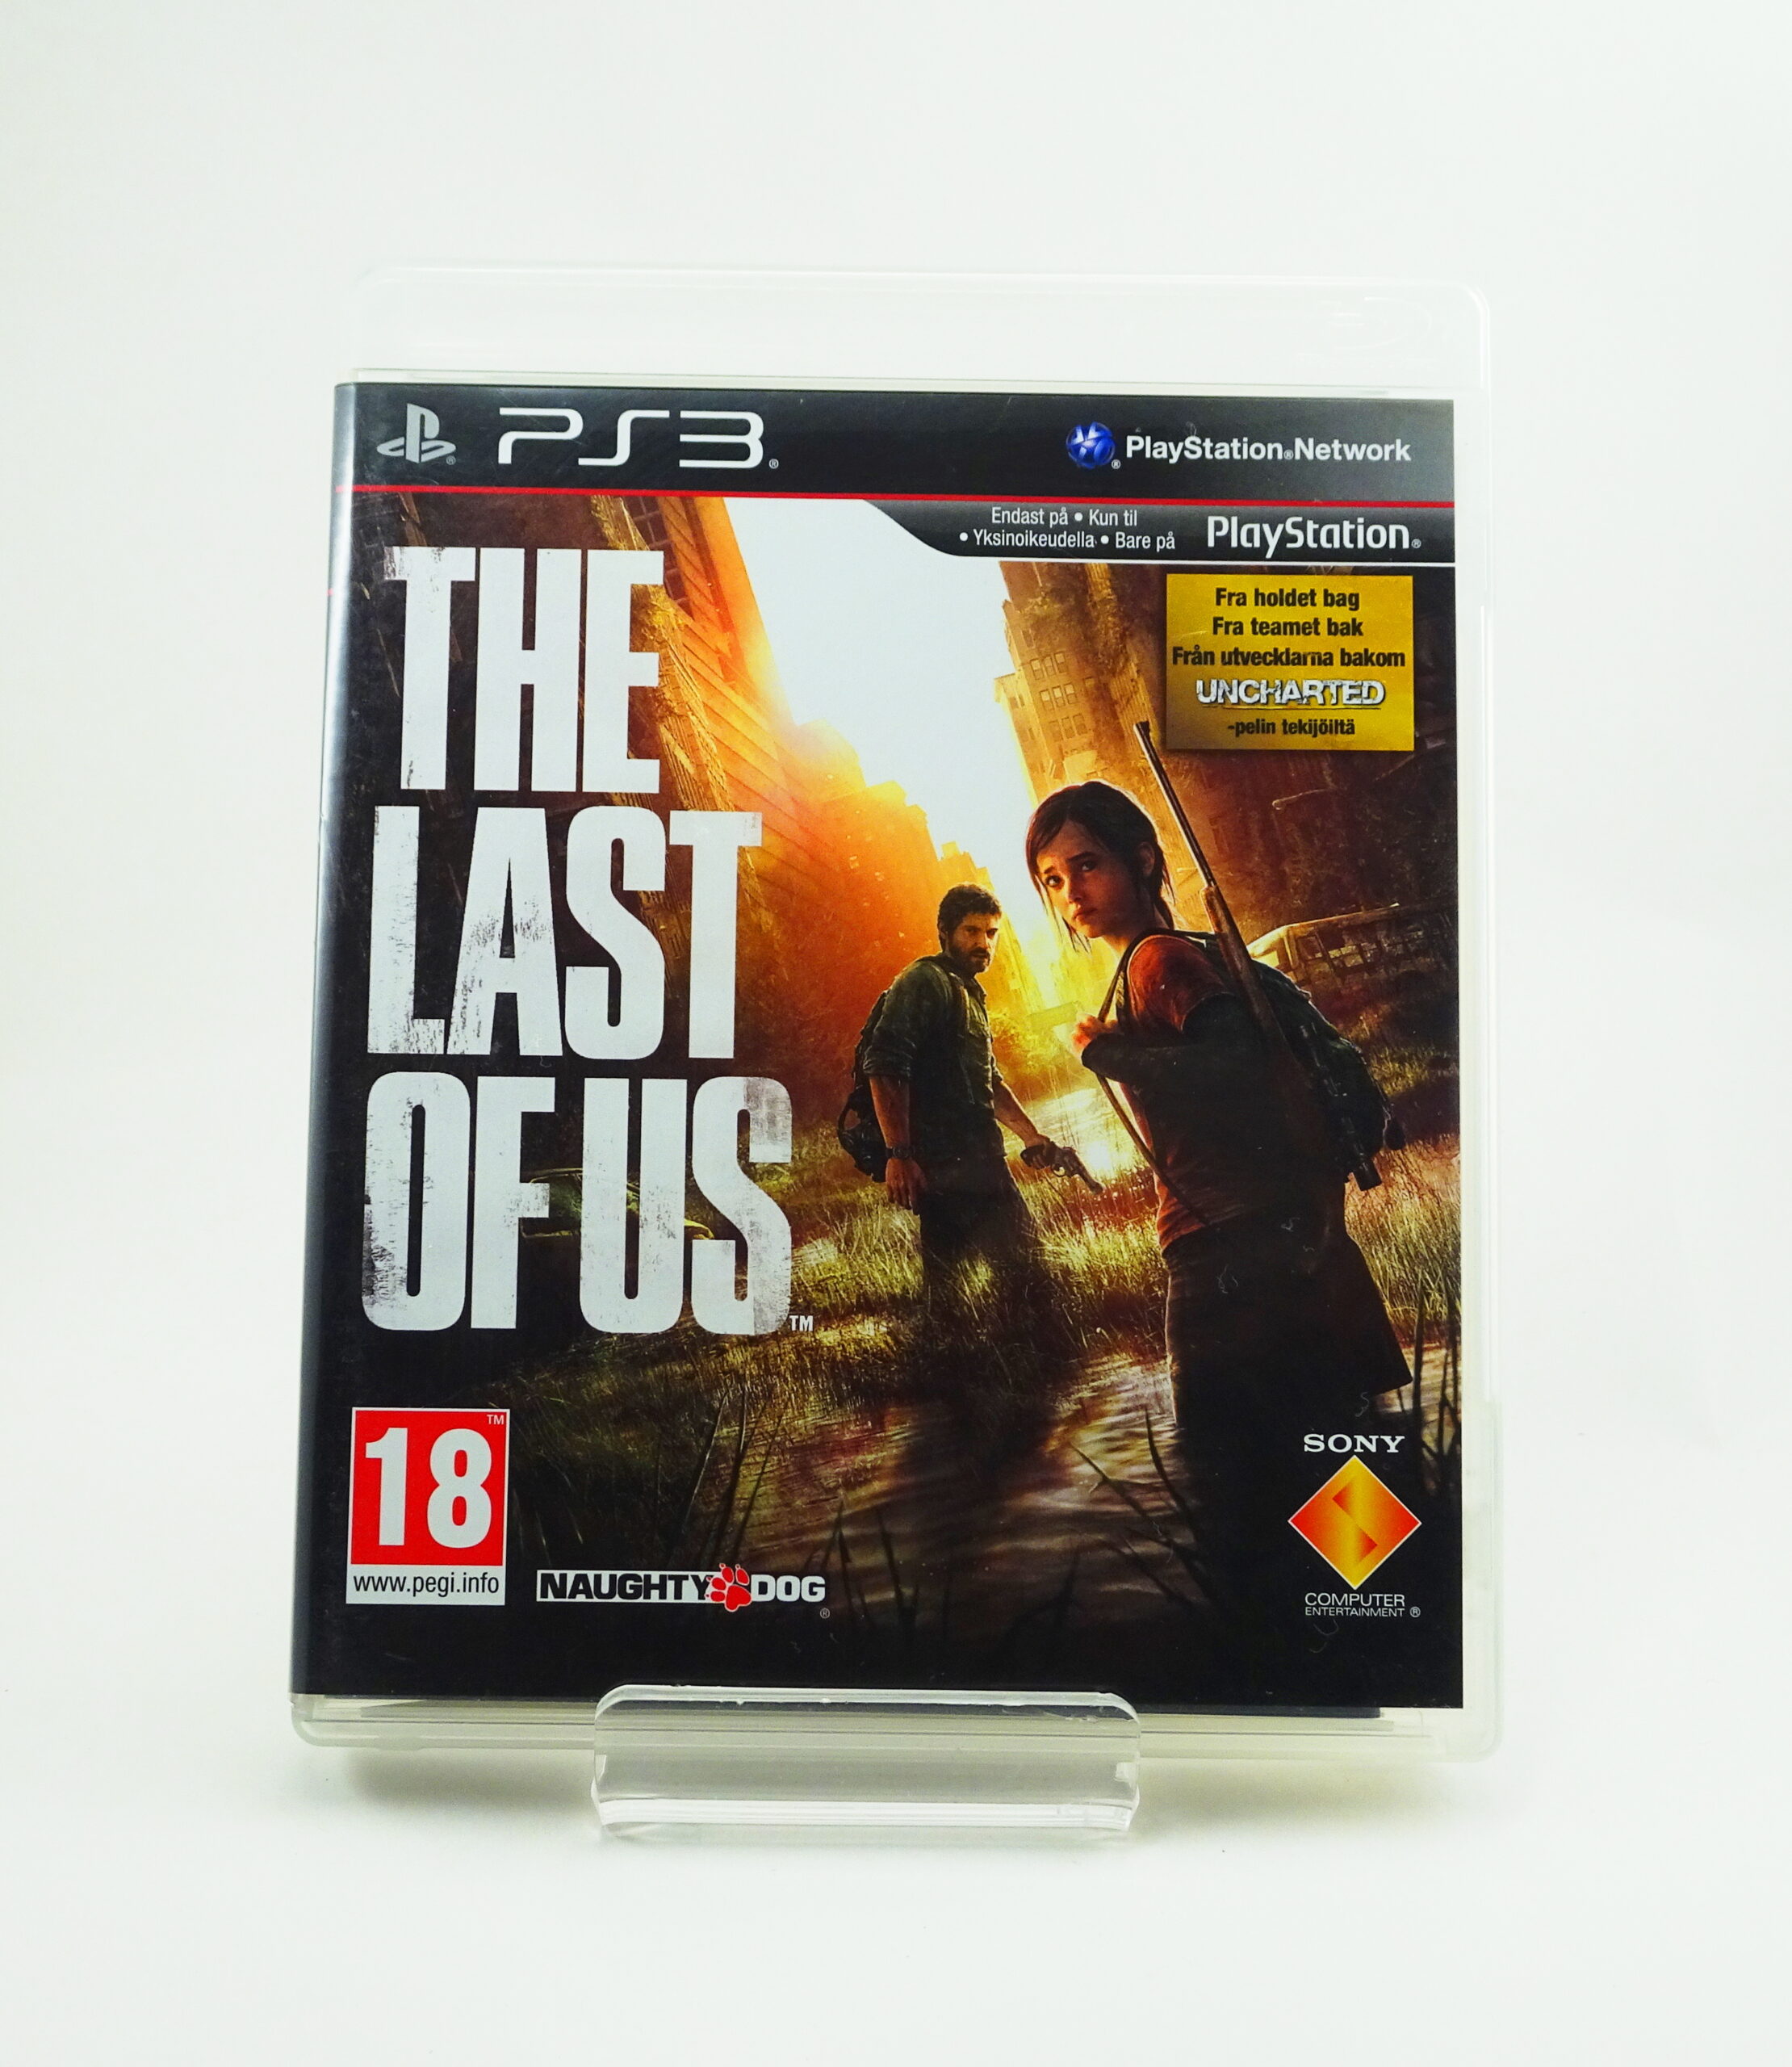 The Last Of Us (PS3)